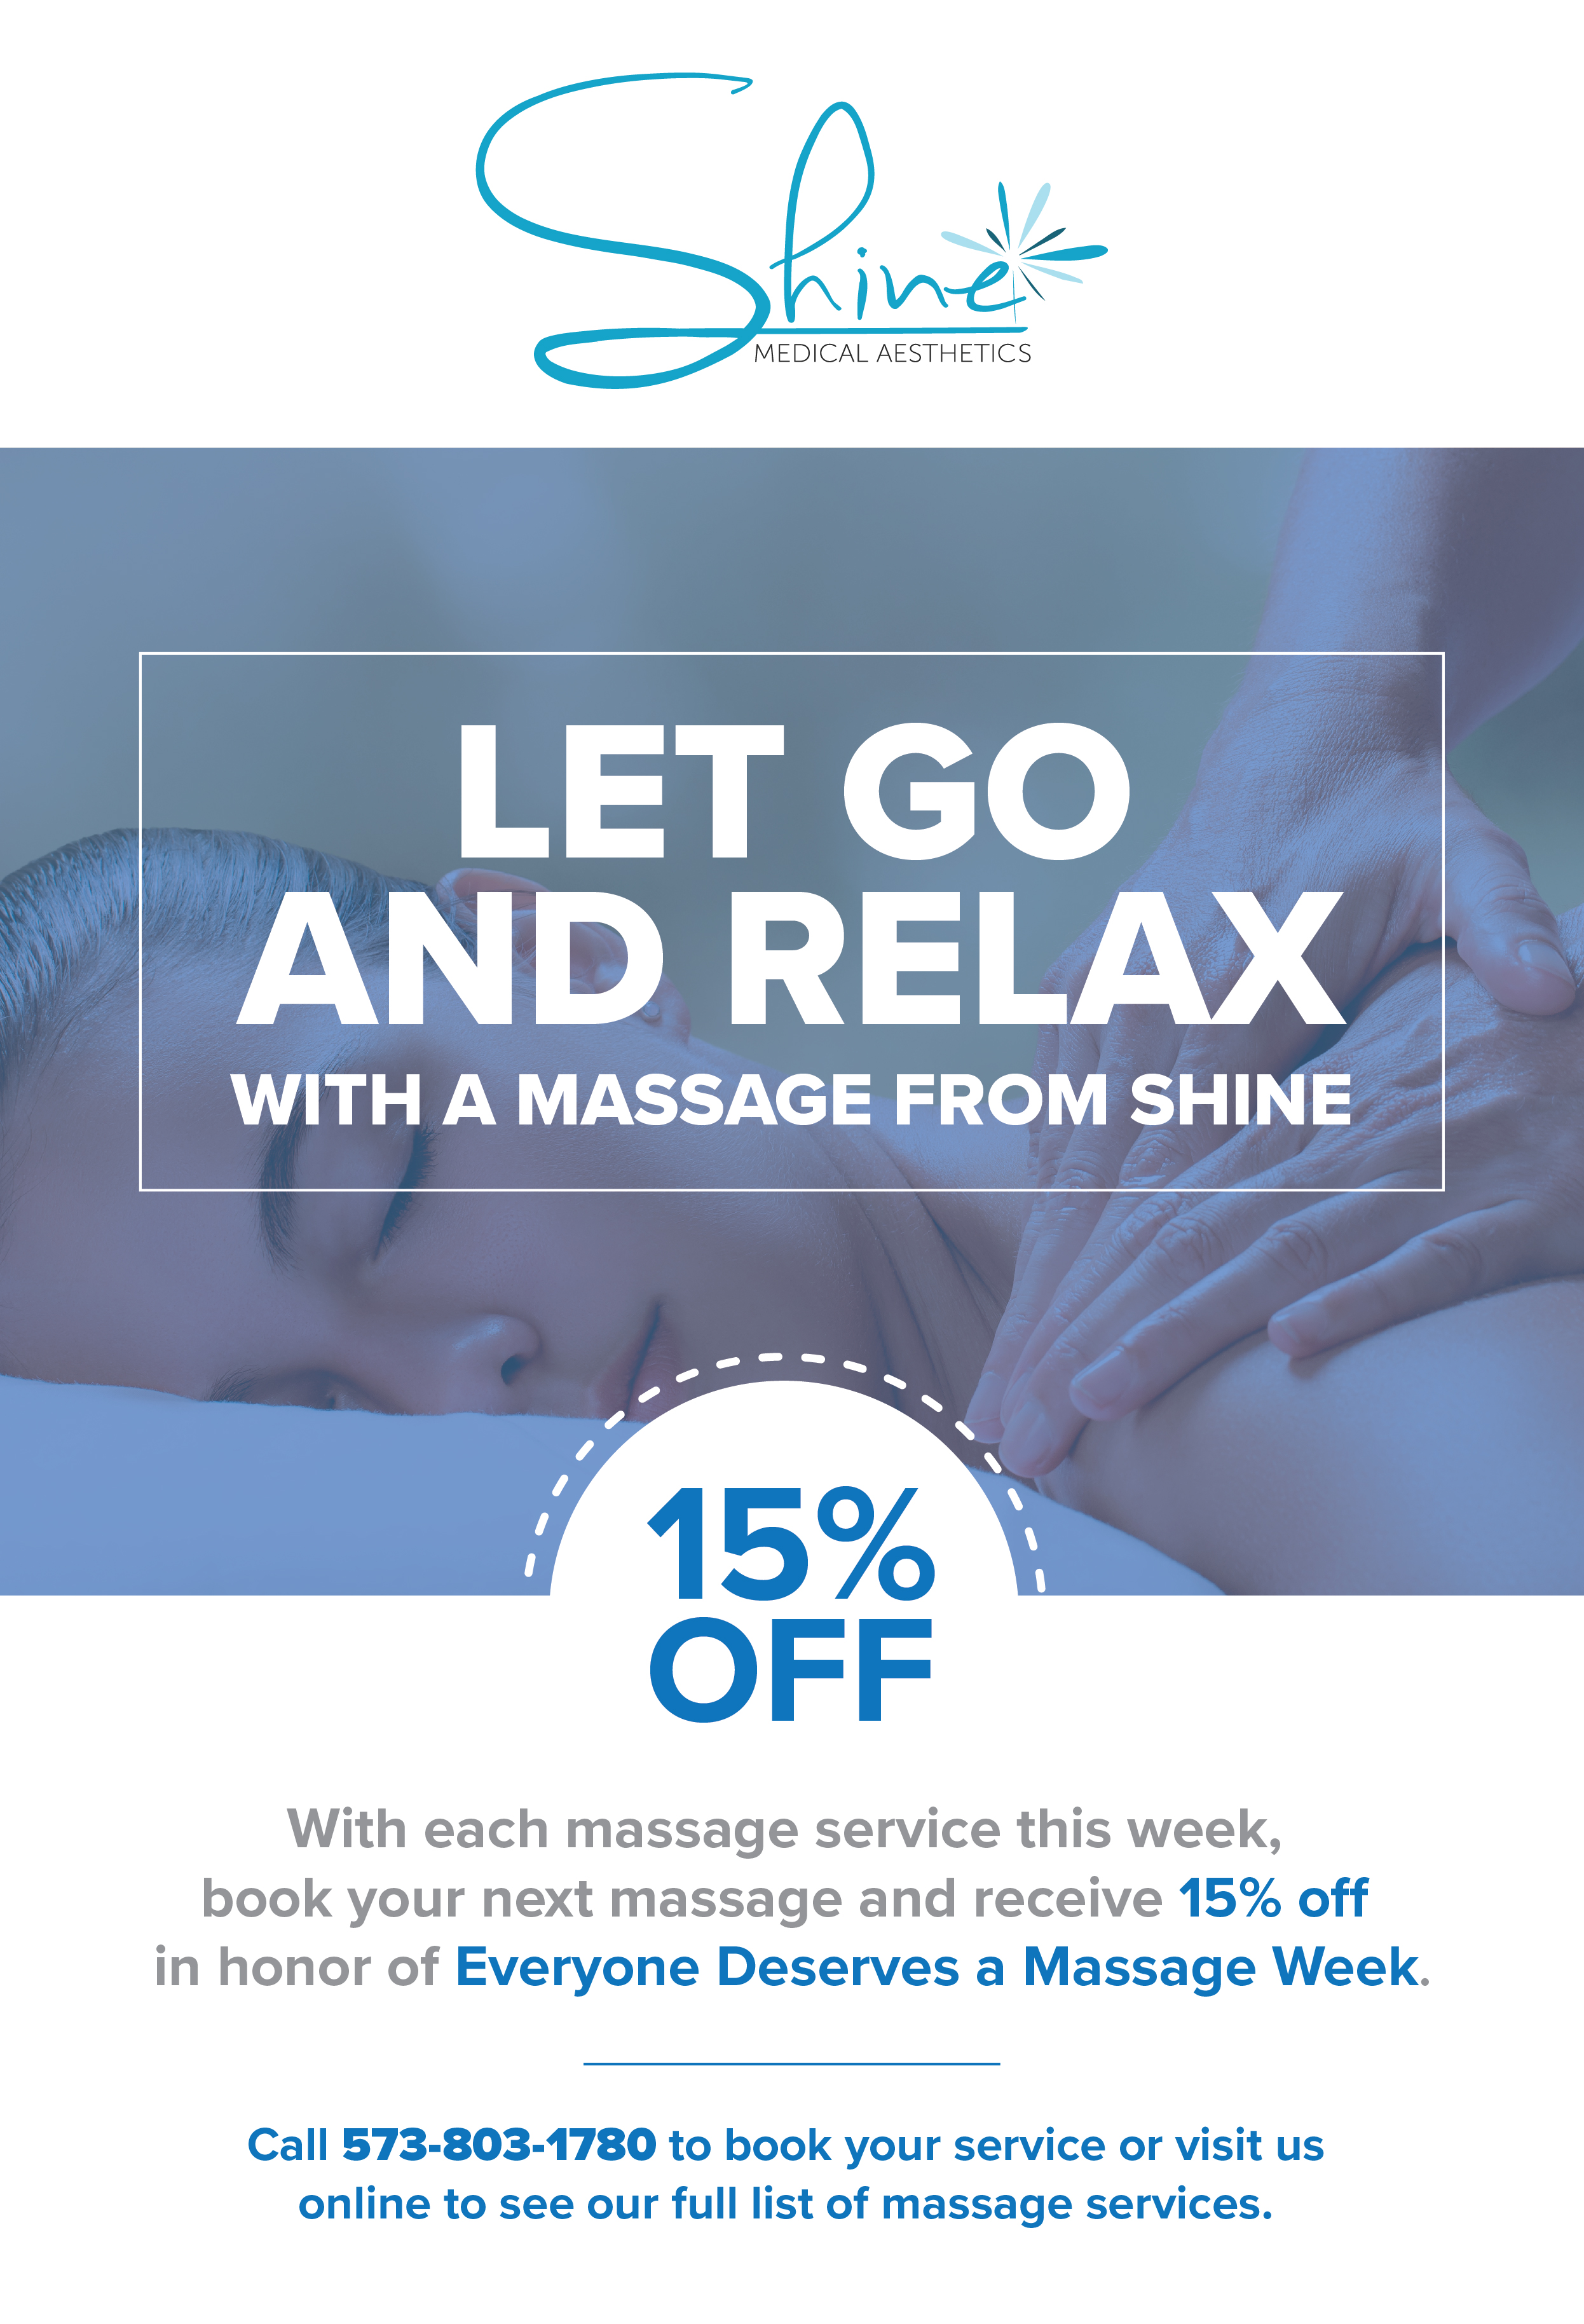 It’s National EveryBody Deserves A Massage Week!